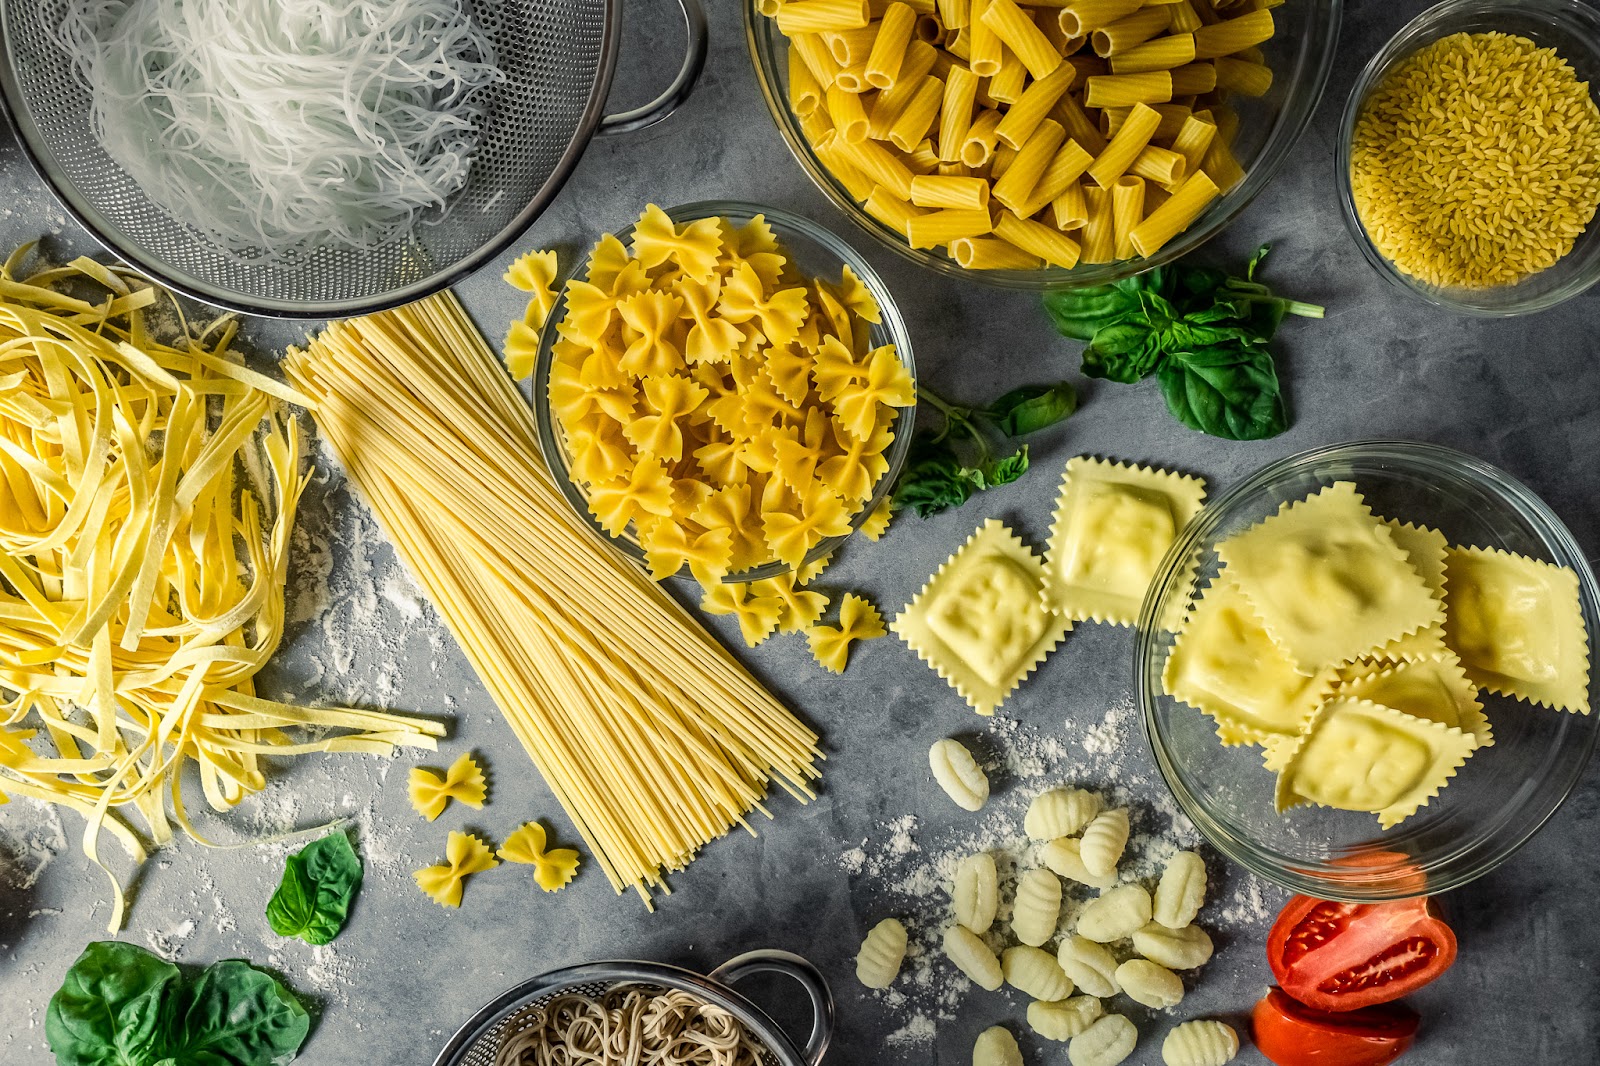 a-guide-to-pasta-04e9c0b914000009269d420c